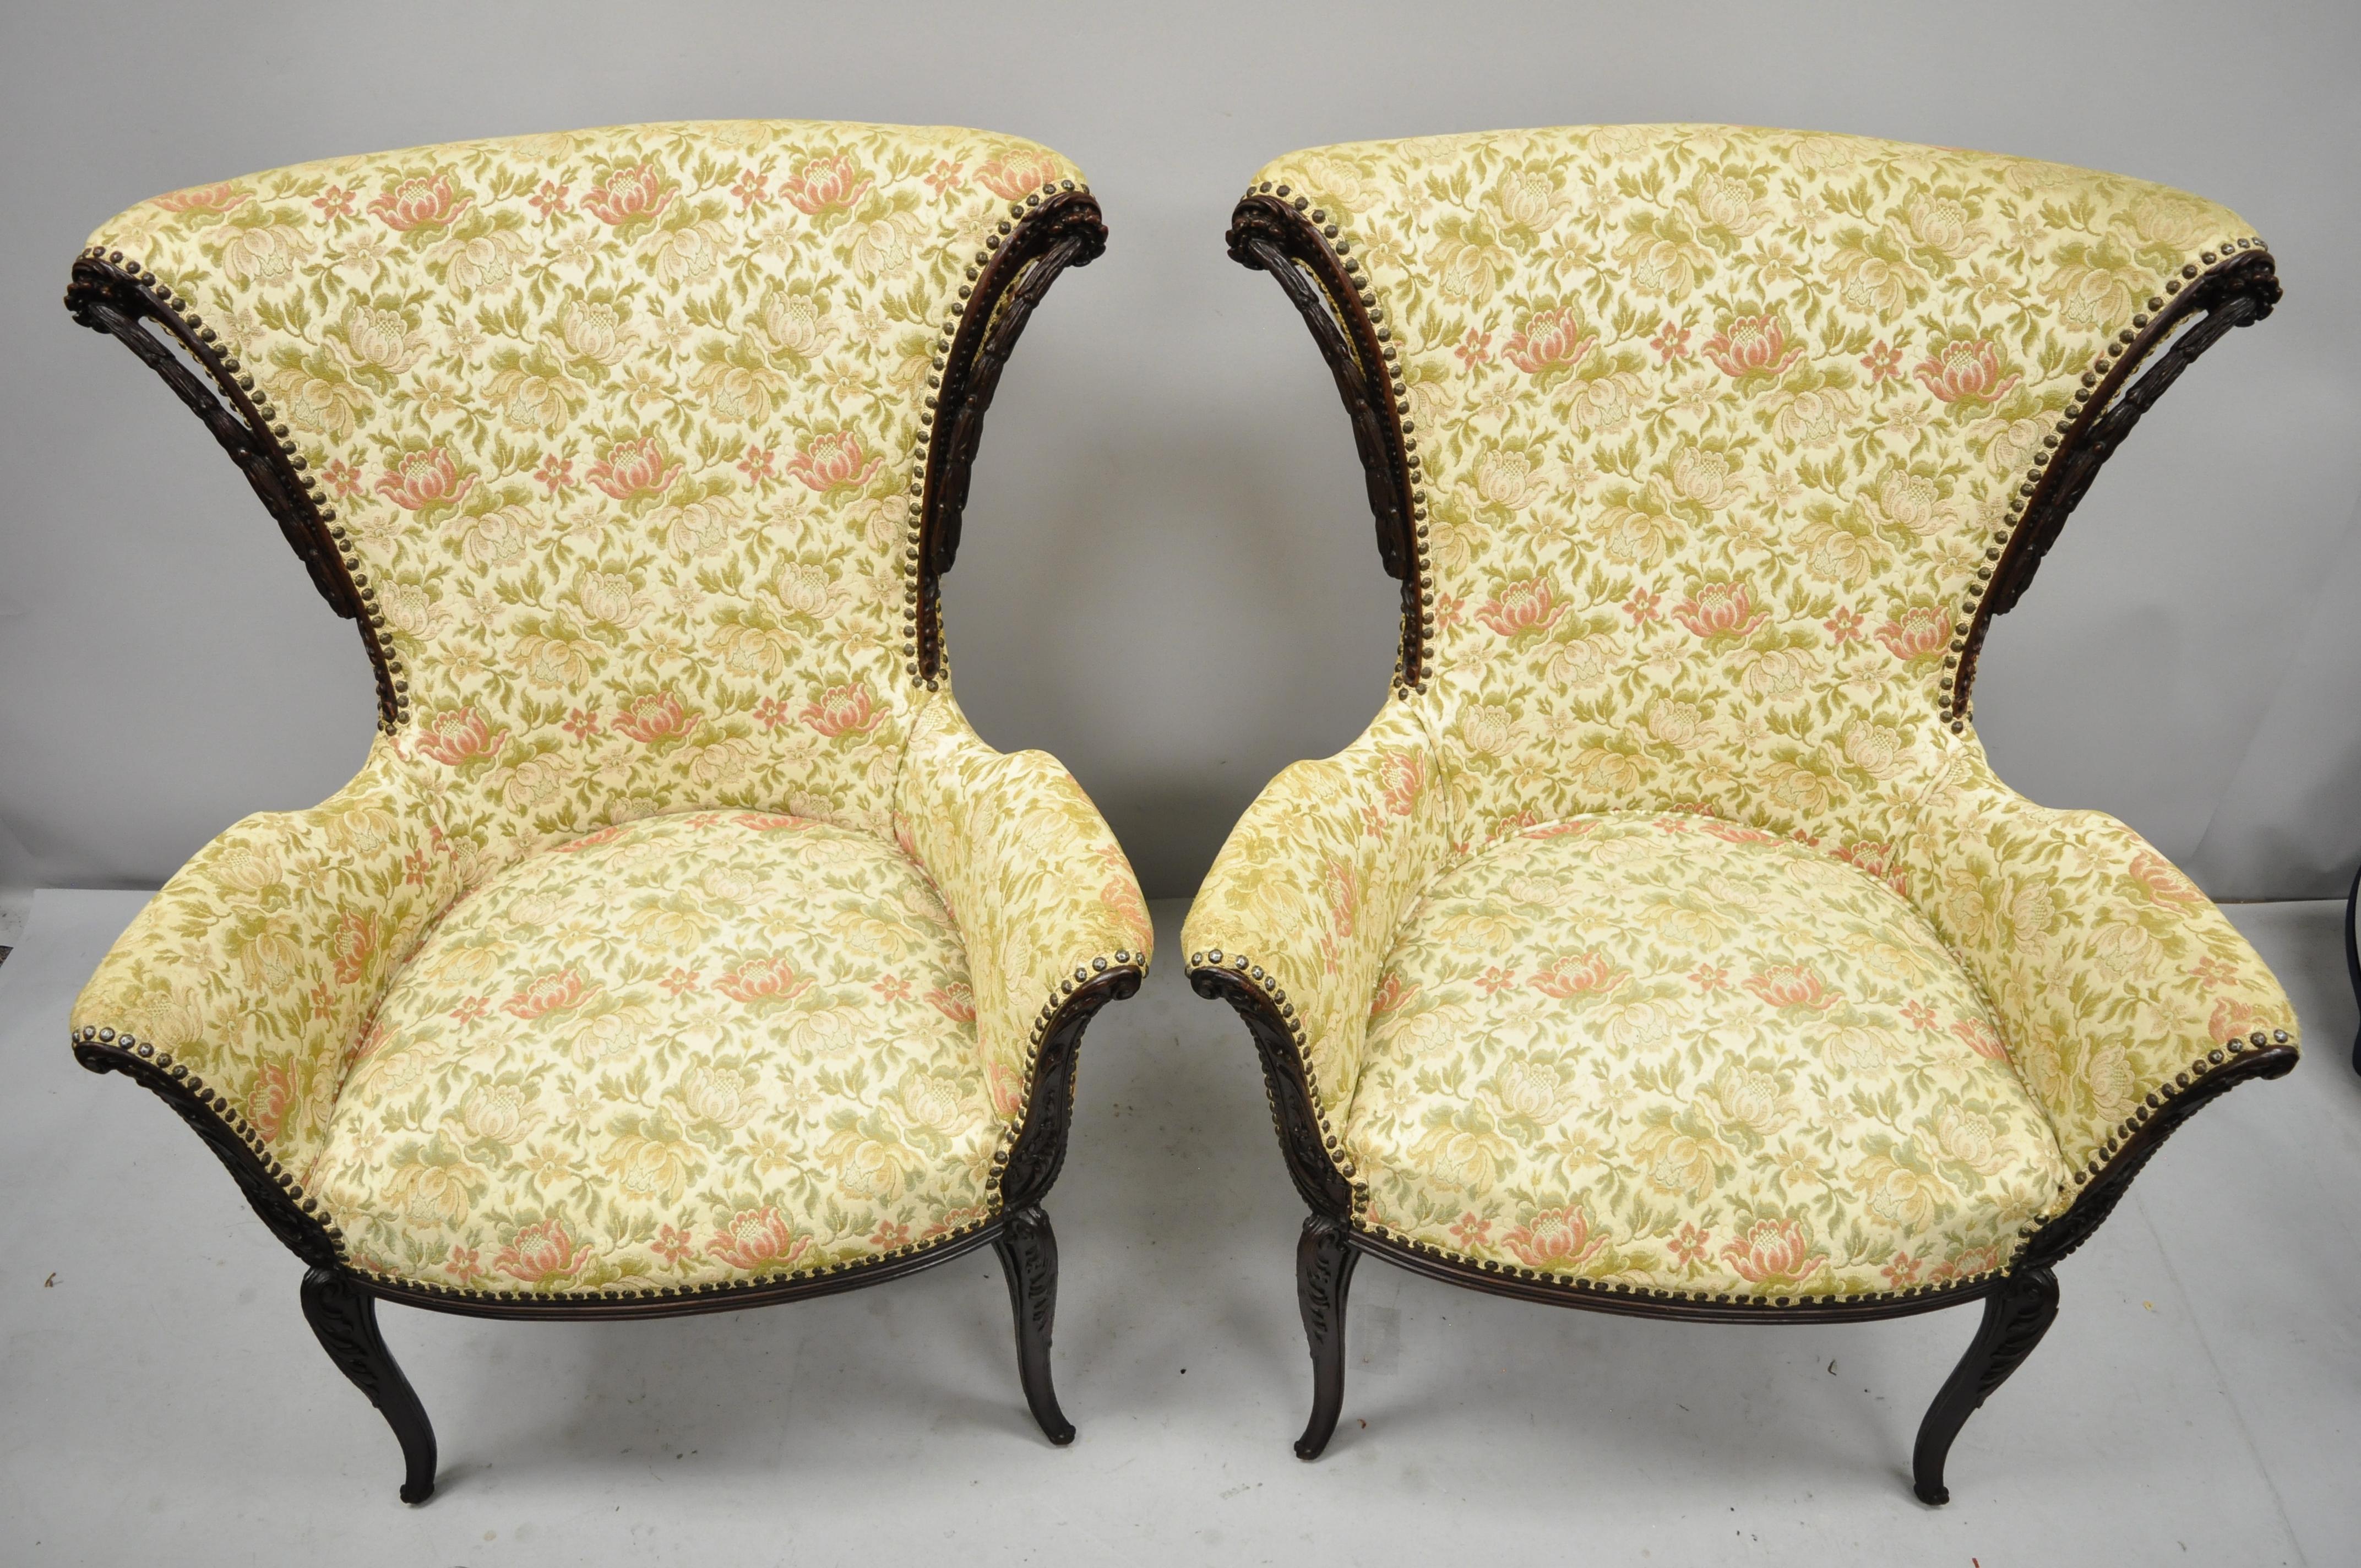 Pair of vintage French Hollywood Regency carved mahogany fireside lounge arm chairs. Items feature solid wood frame, nicely carved details, tapered legs, great style and form, circa early 20th century. Measurements: 41